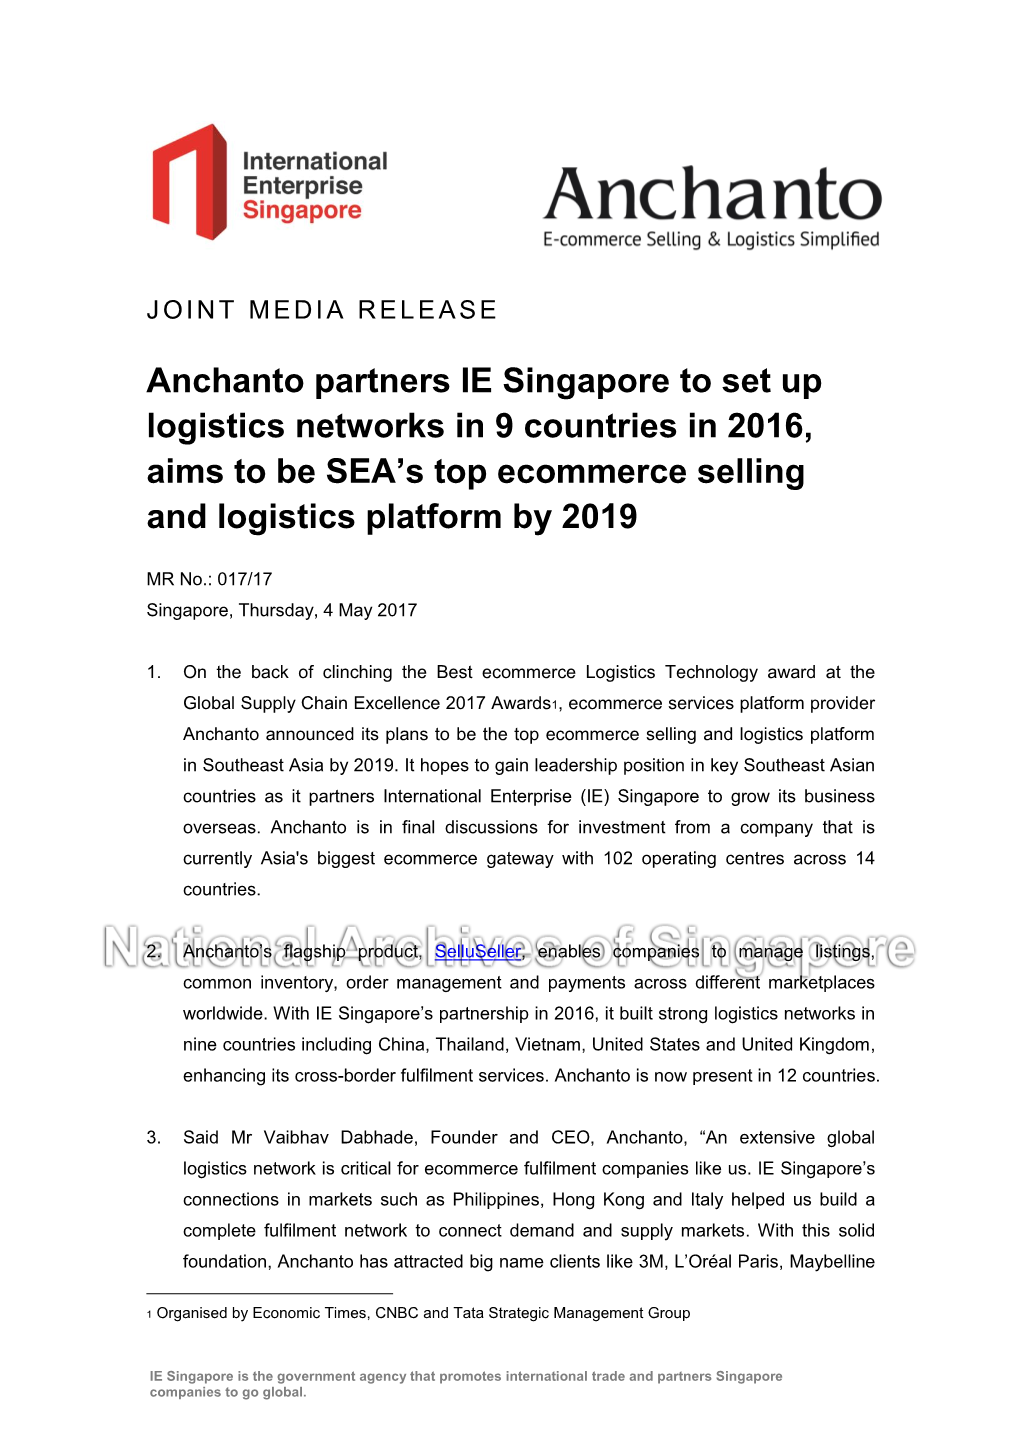 Anchanto Partners IE Singapore to Set up Logistics Networks in 9 Countries in 2016, Aims to Be SEA’S Top Ecommerce Selling and Logistics Platform by 2019